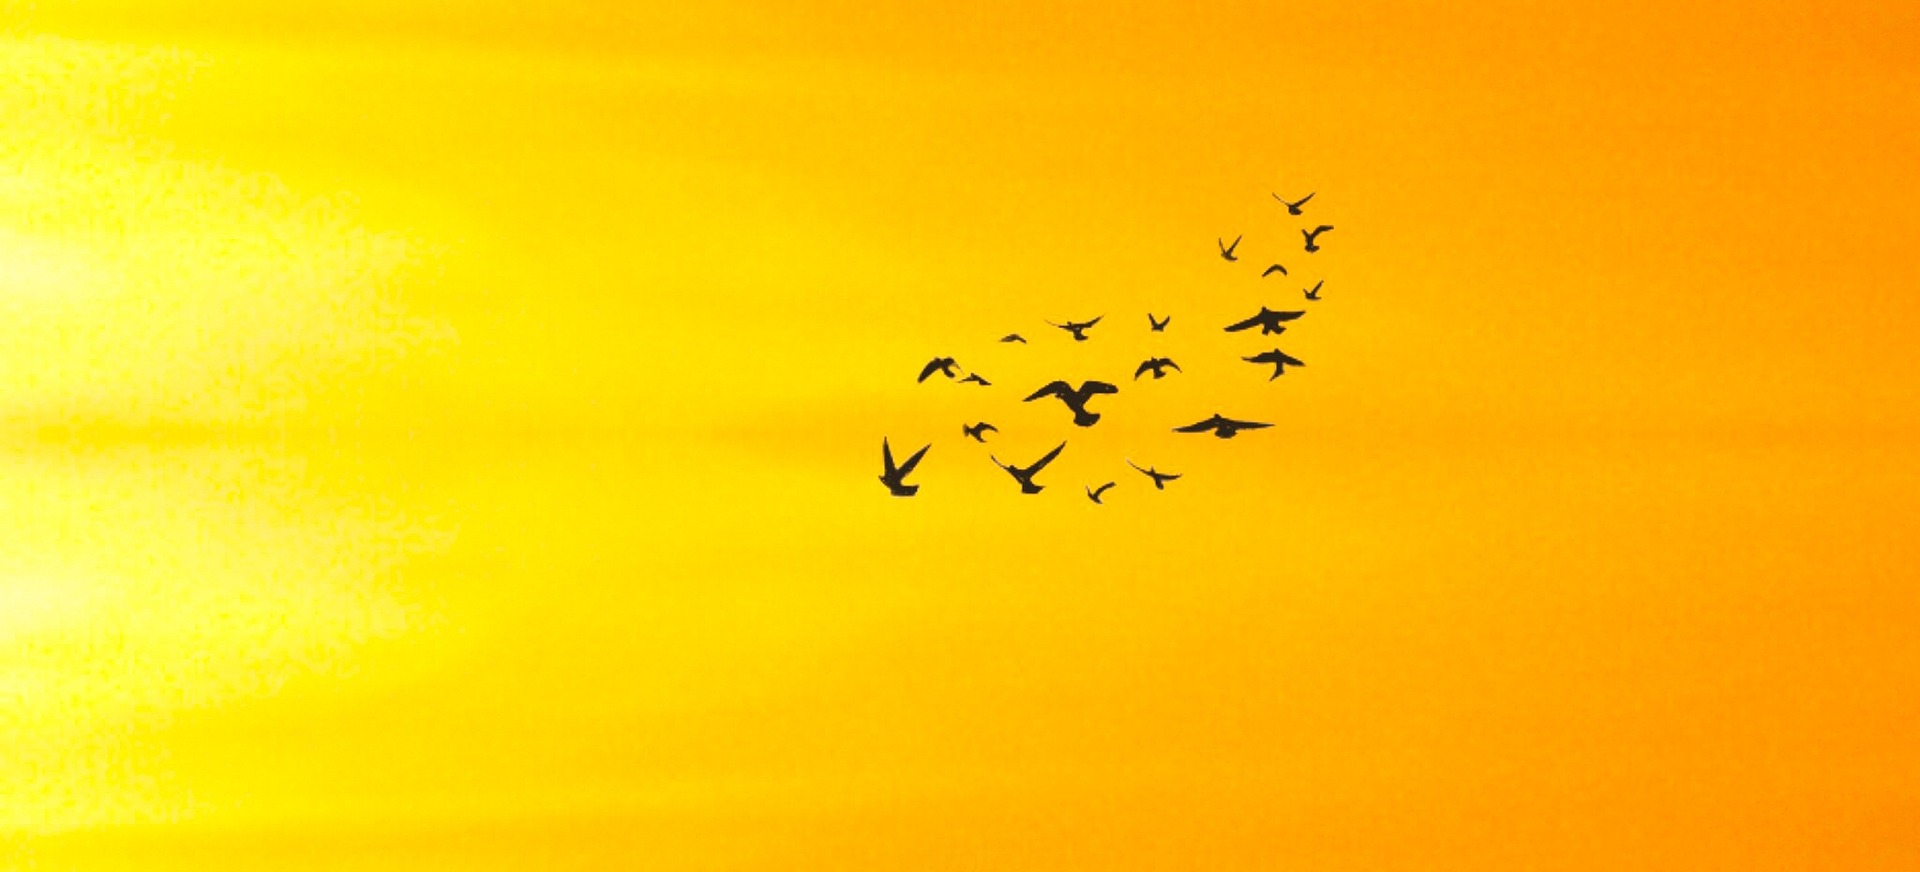 Illustration of birds flying over a bright yellow sunset. Picture courtesy Pixabay/ Mohamed Hassan